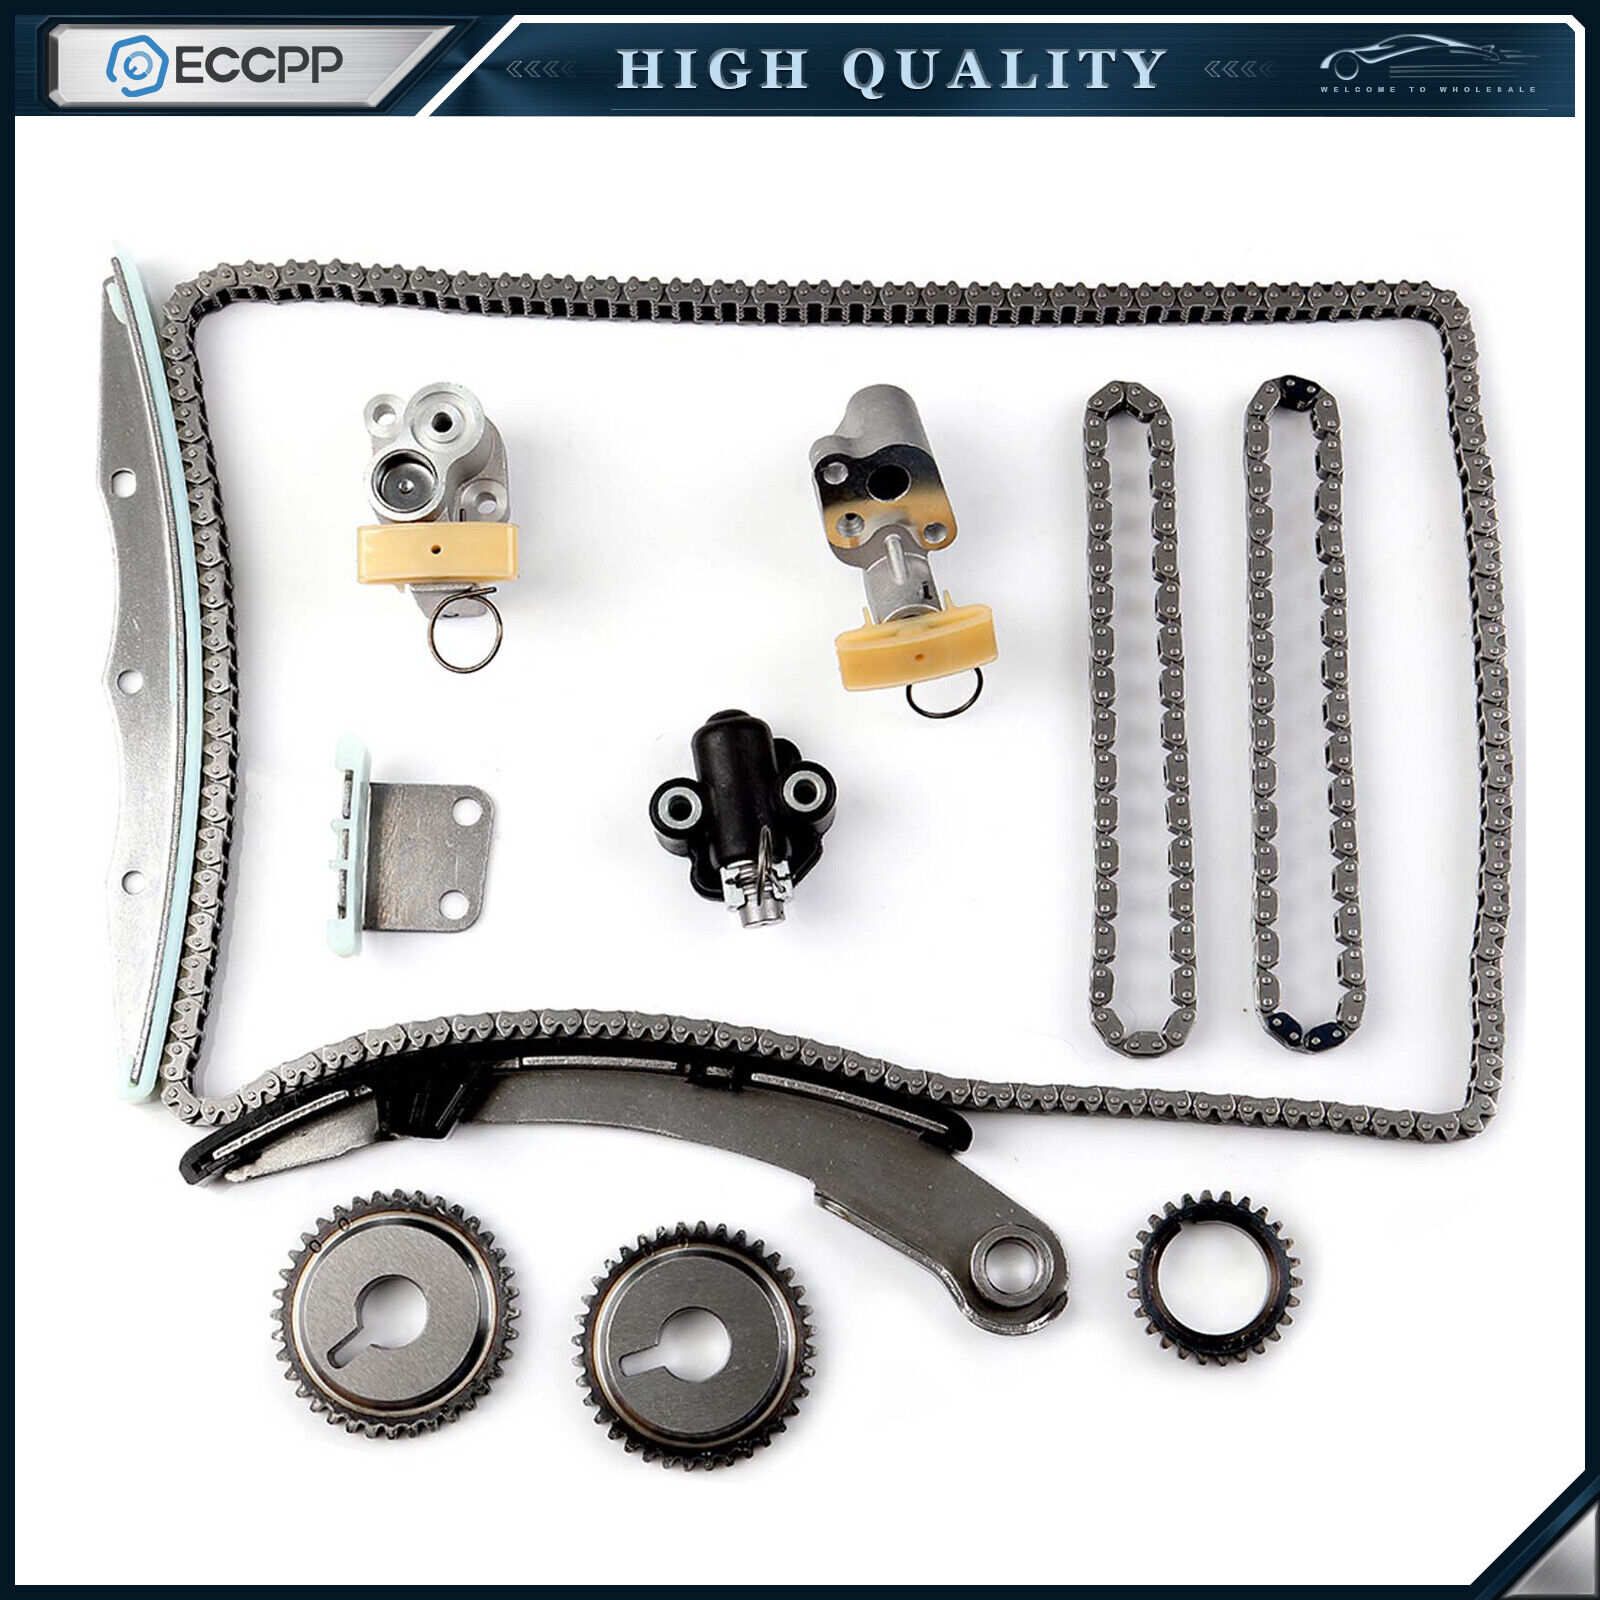 Timing Chain Kit for 09-14 Nissan Maxima Murano Altima Quest Pathfinder 3.5L V6